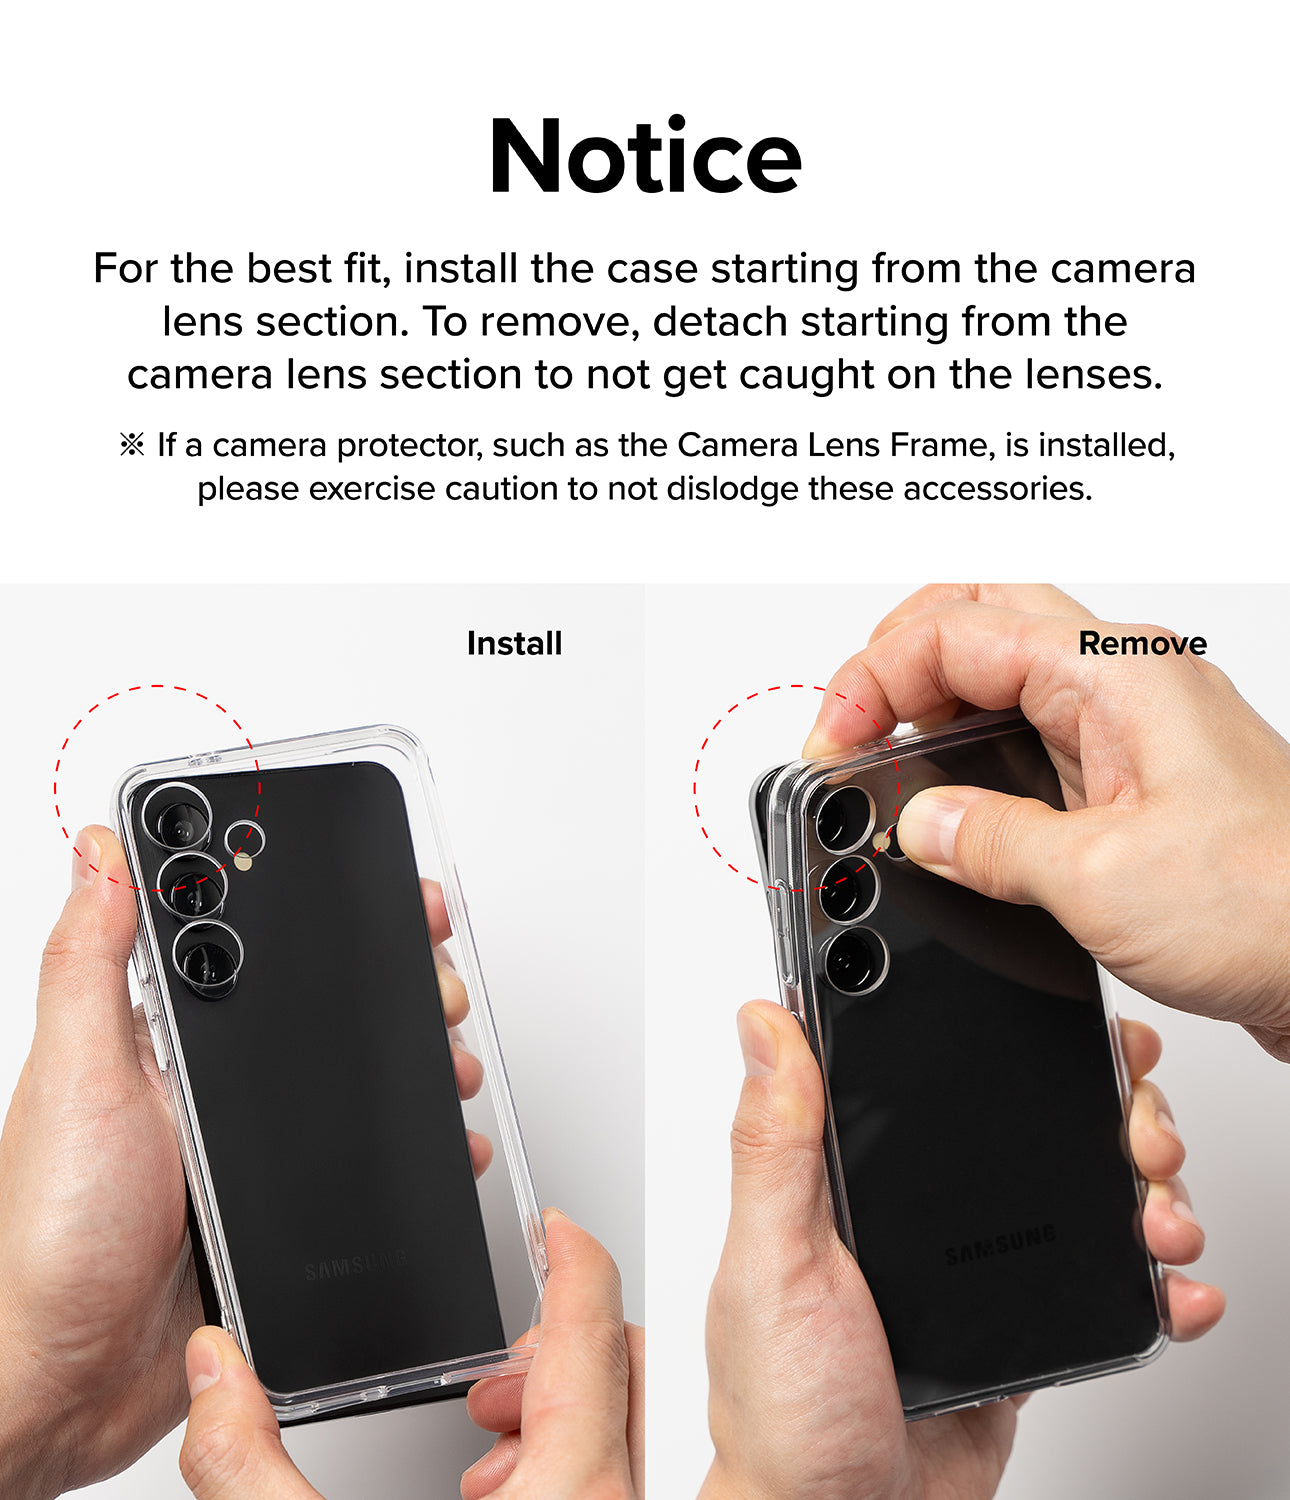 Galaxy S24 Case | Fusion - Notice. For the best fit, install the case starting from the camera lens section. To remove, detach starting from the camera lens section to not get caught on the lenses.